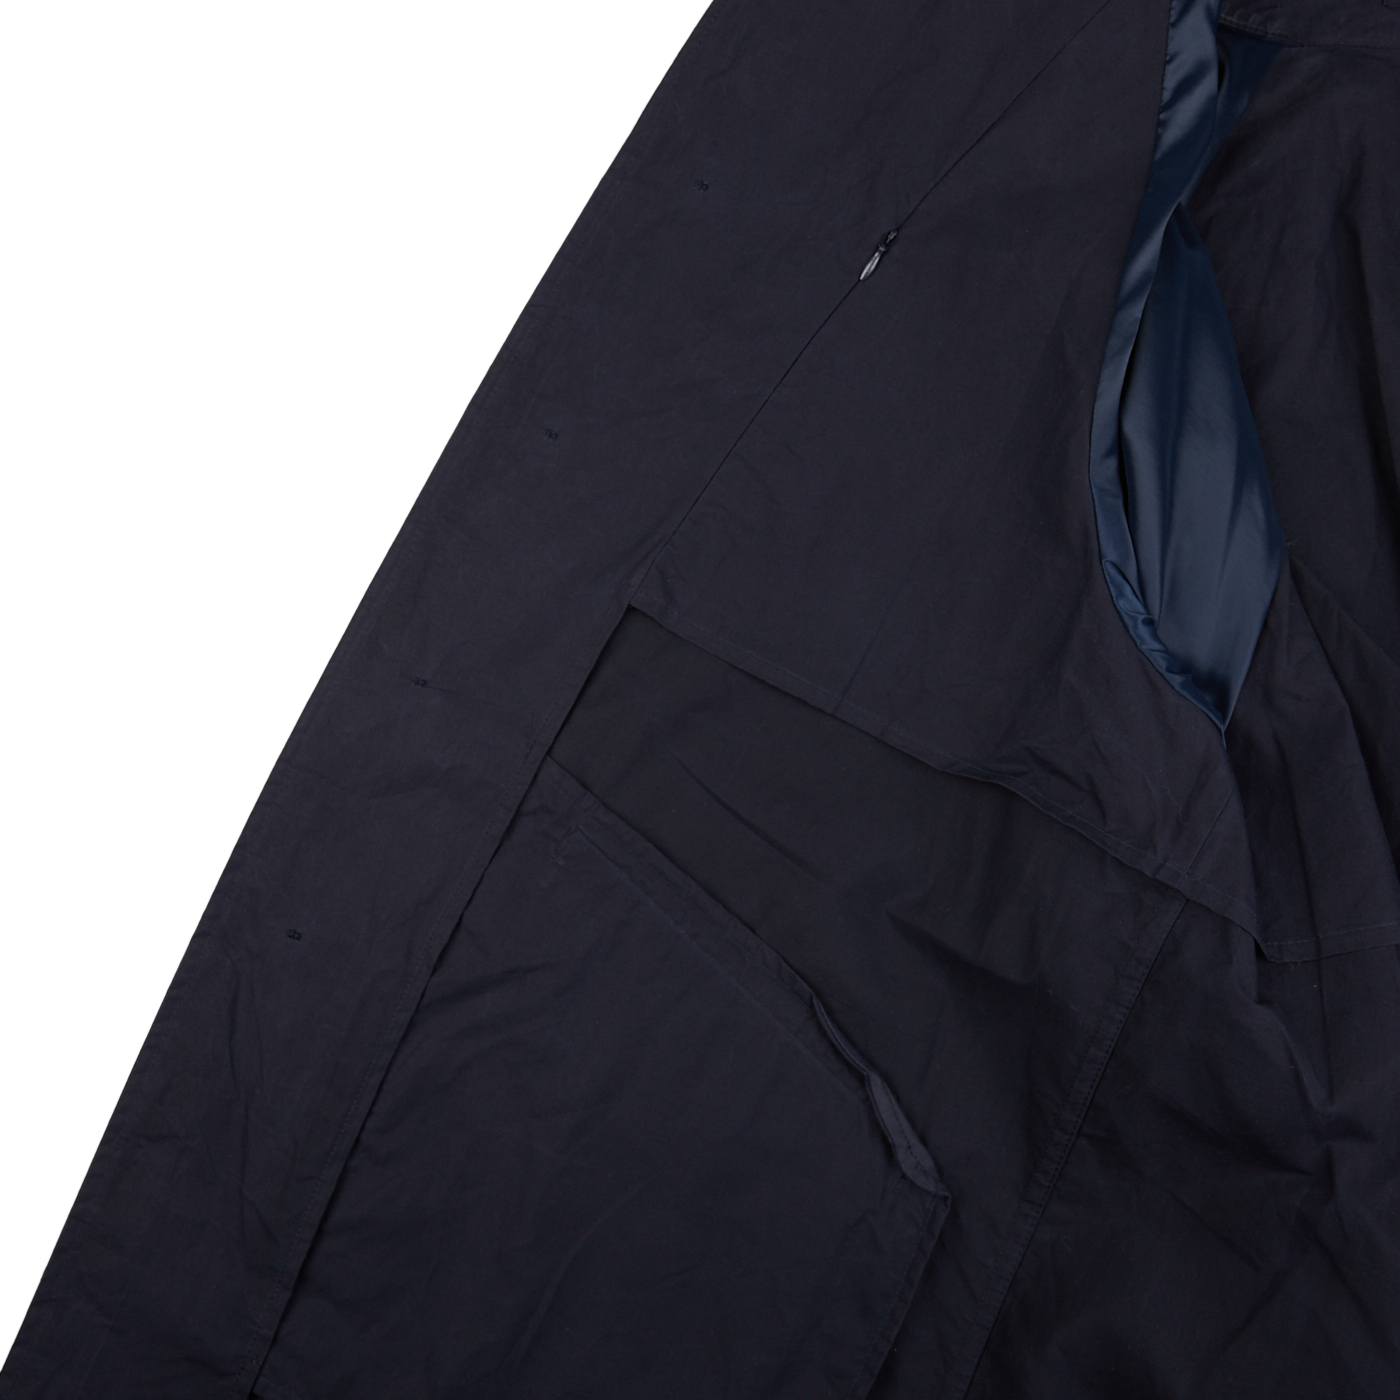 The back of a Navy Blue Waxed Cotton Kamikaze Trenchcoat by L'Impermeabile with a zippered pocket.